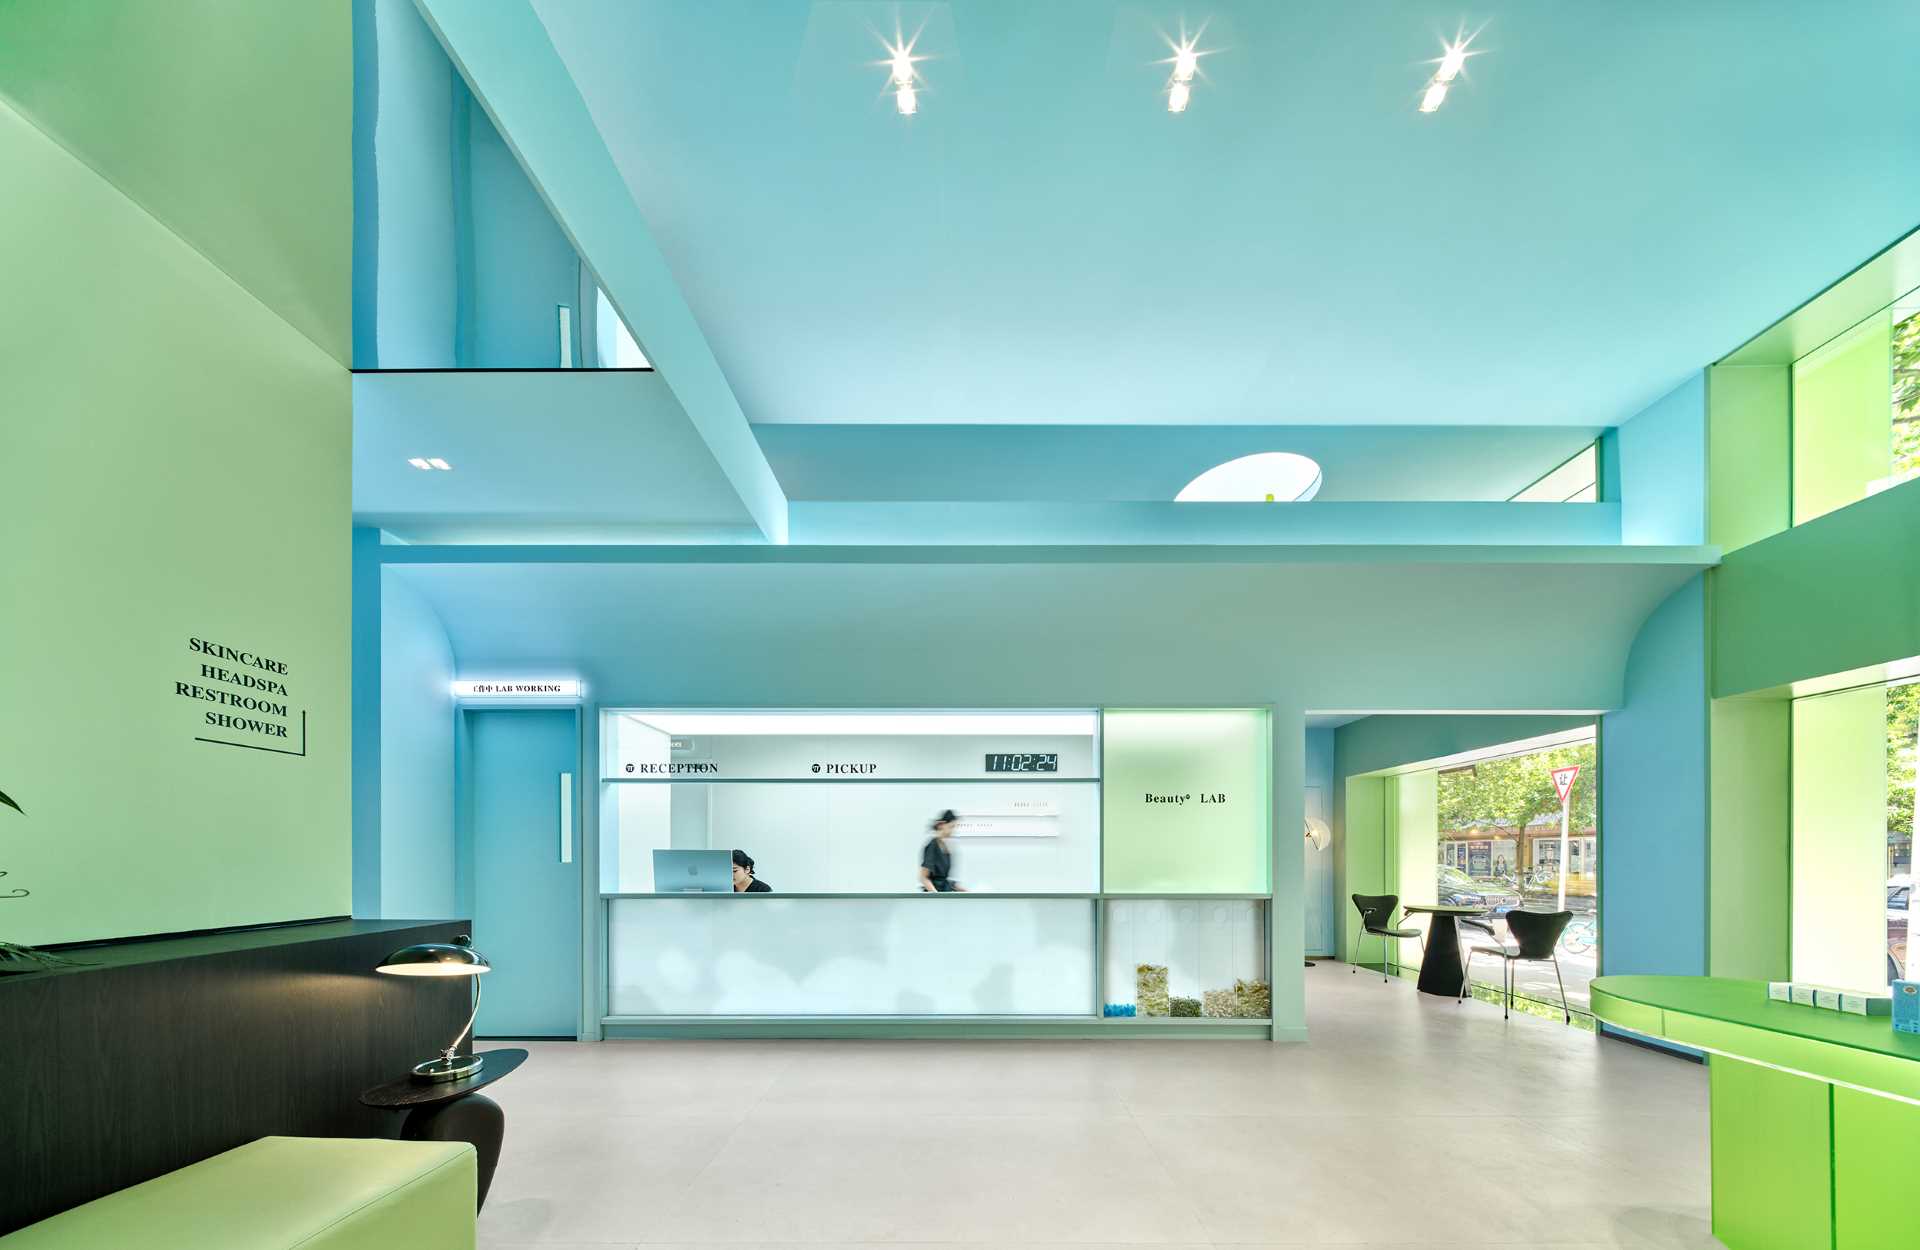 Making use of the high ceilings, the designers of this skincare center created a faux second floor, allowing storage and access for air conditioning duct maintenance.